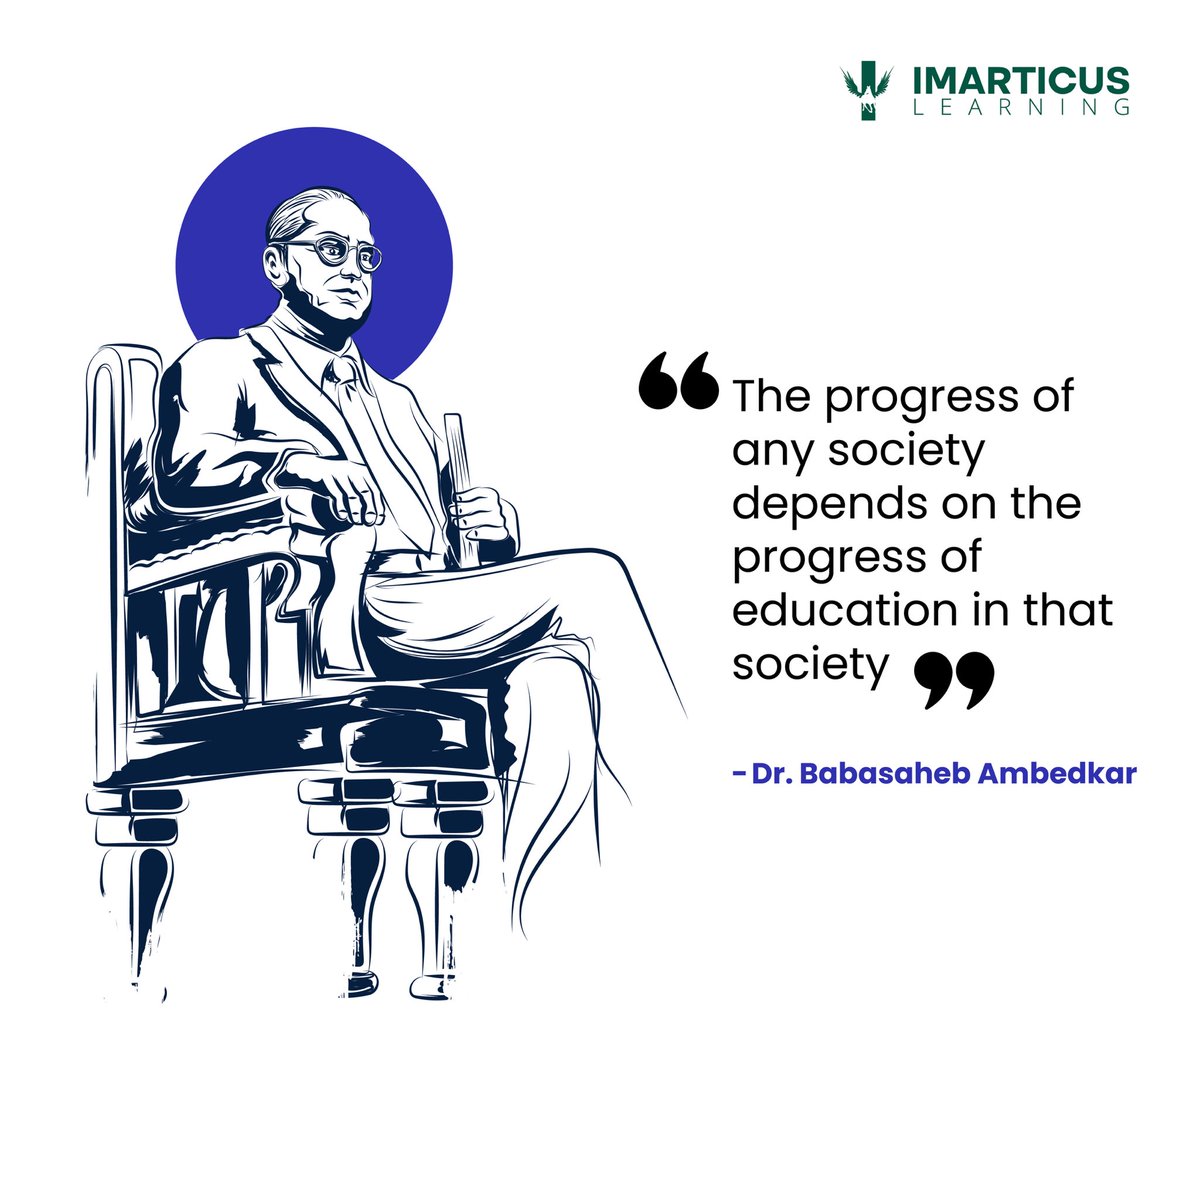 Dr. B.R. Ambedkar, the architect of the Indian Constitution, championed equality for all. His vision for an educated India is what Imarticus Learning strives for every day. This #AmbedkarJayanti, let's pledge to create a more inclusive and equitable society.